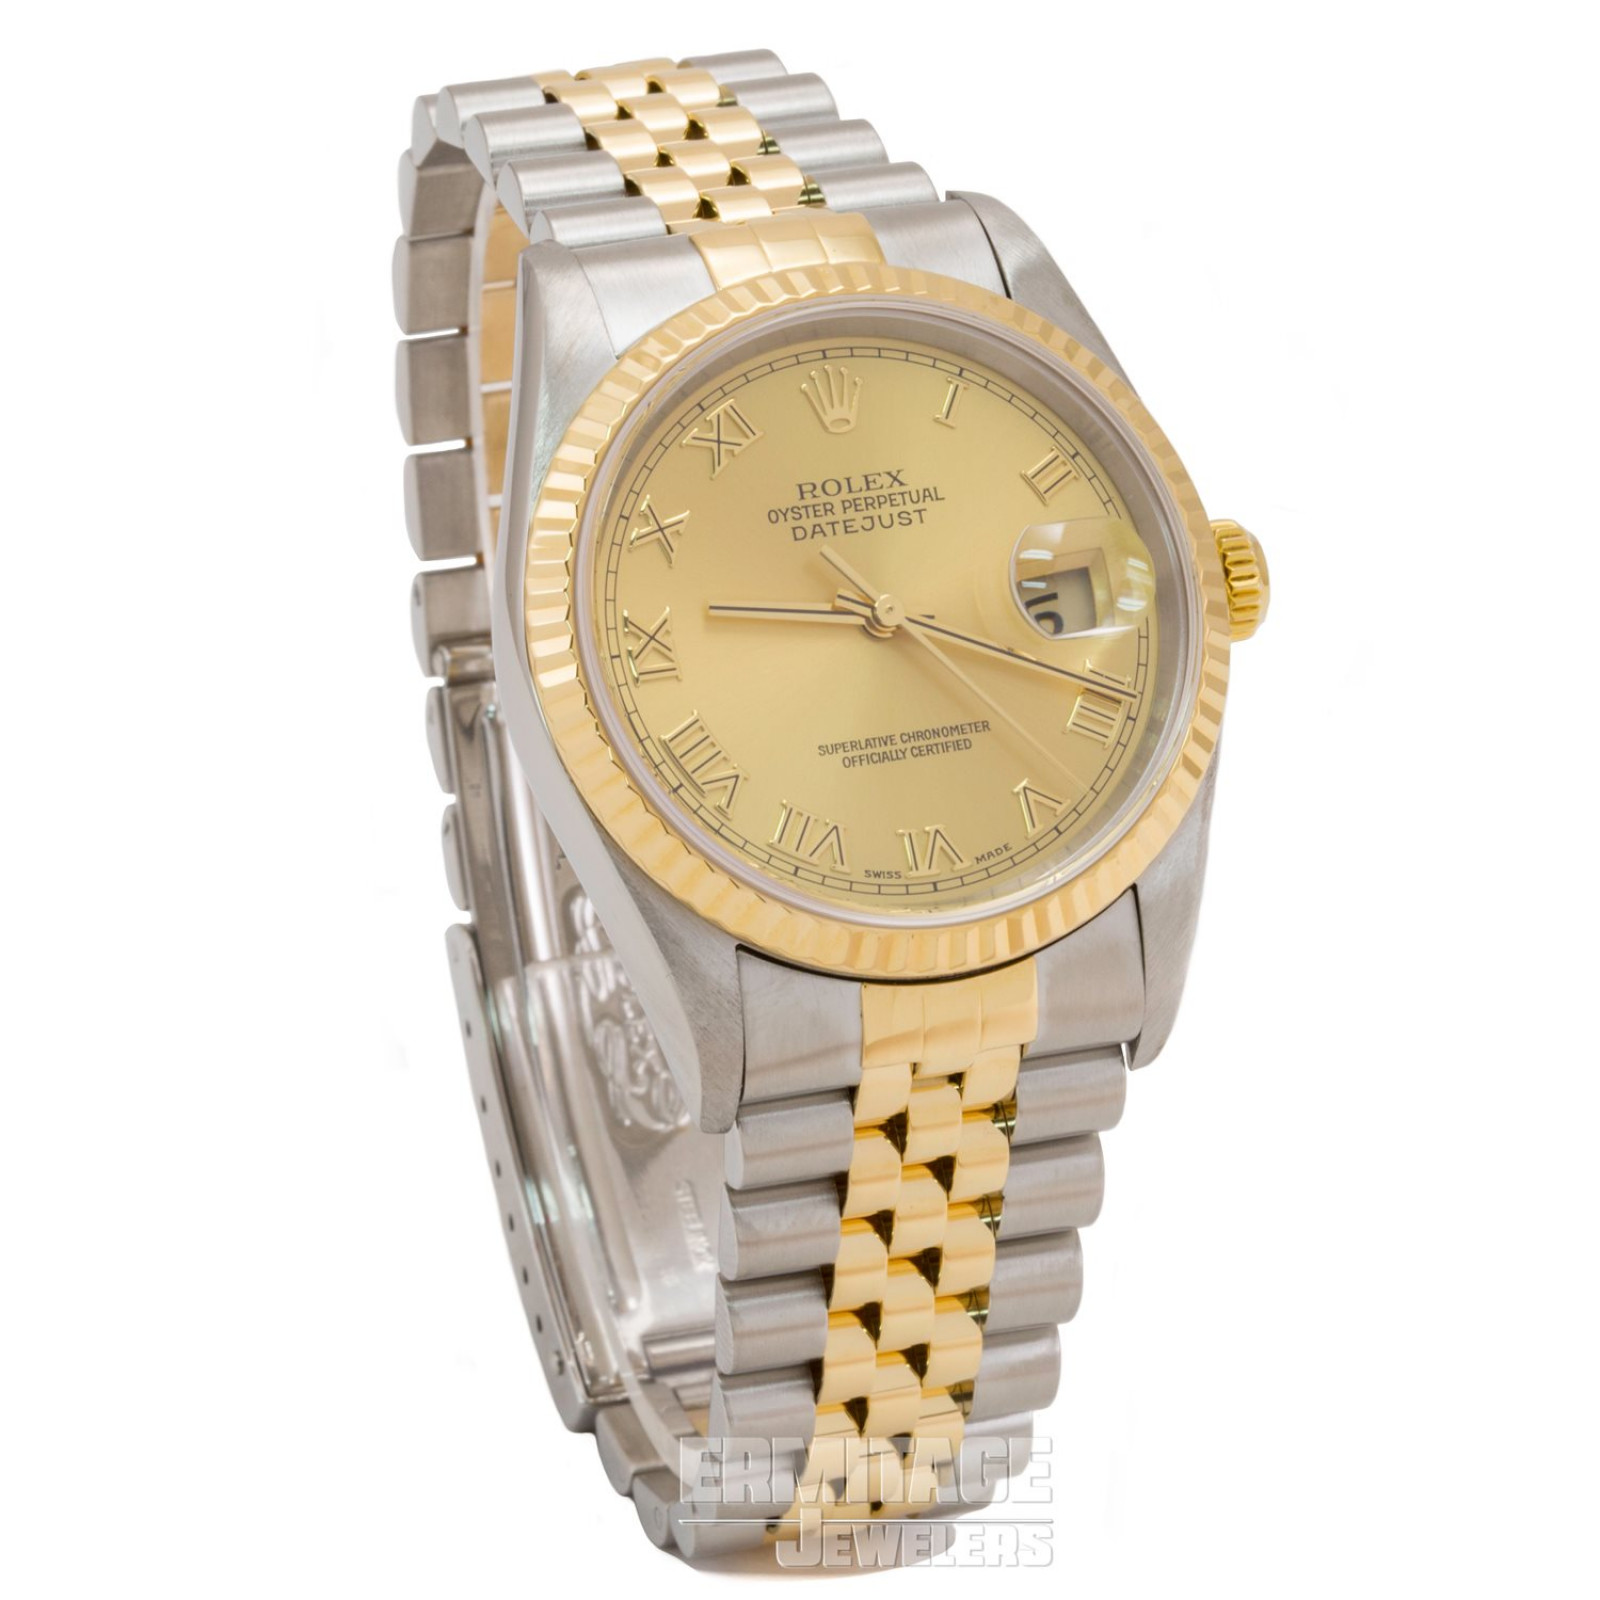 Rolex Datejust 16233 36 mm Gold & Steel on Oyster